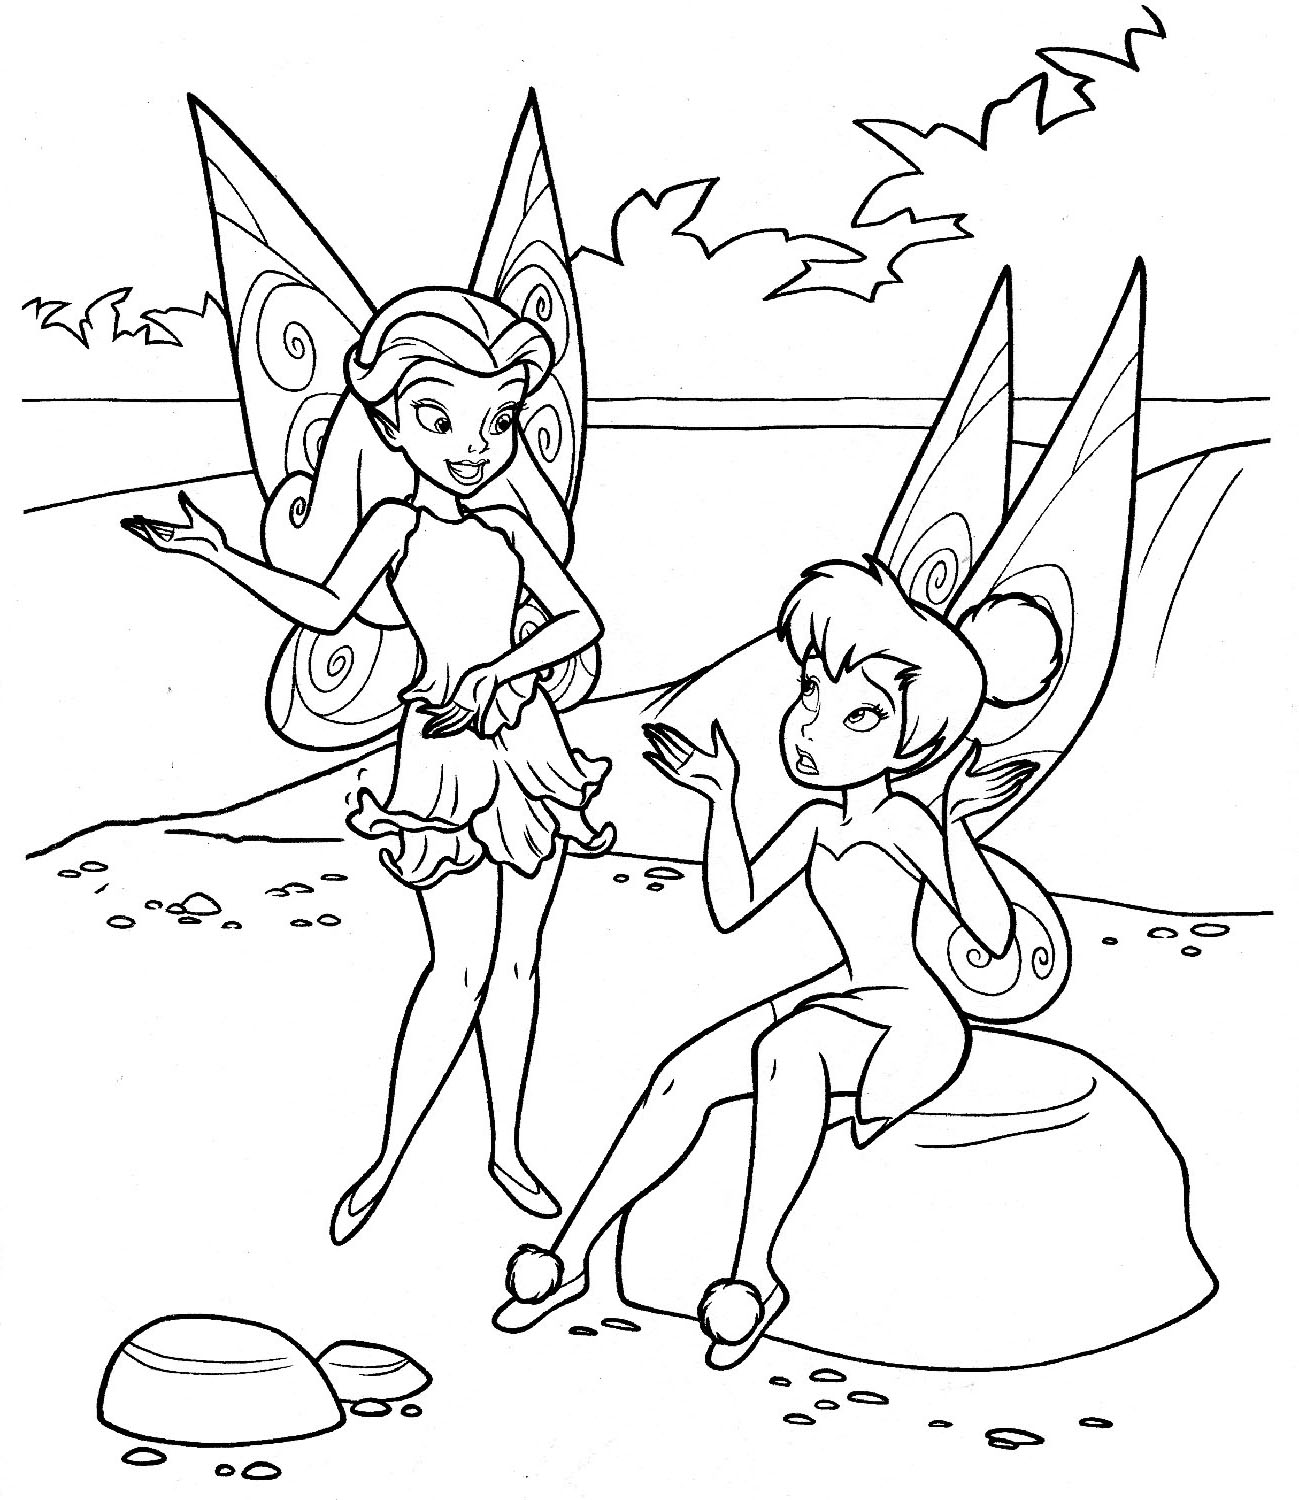 Download Friendship Coloring Pages - Best Coloring Pages For Kids